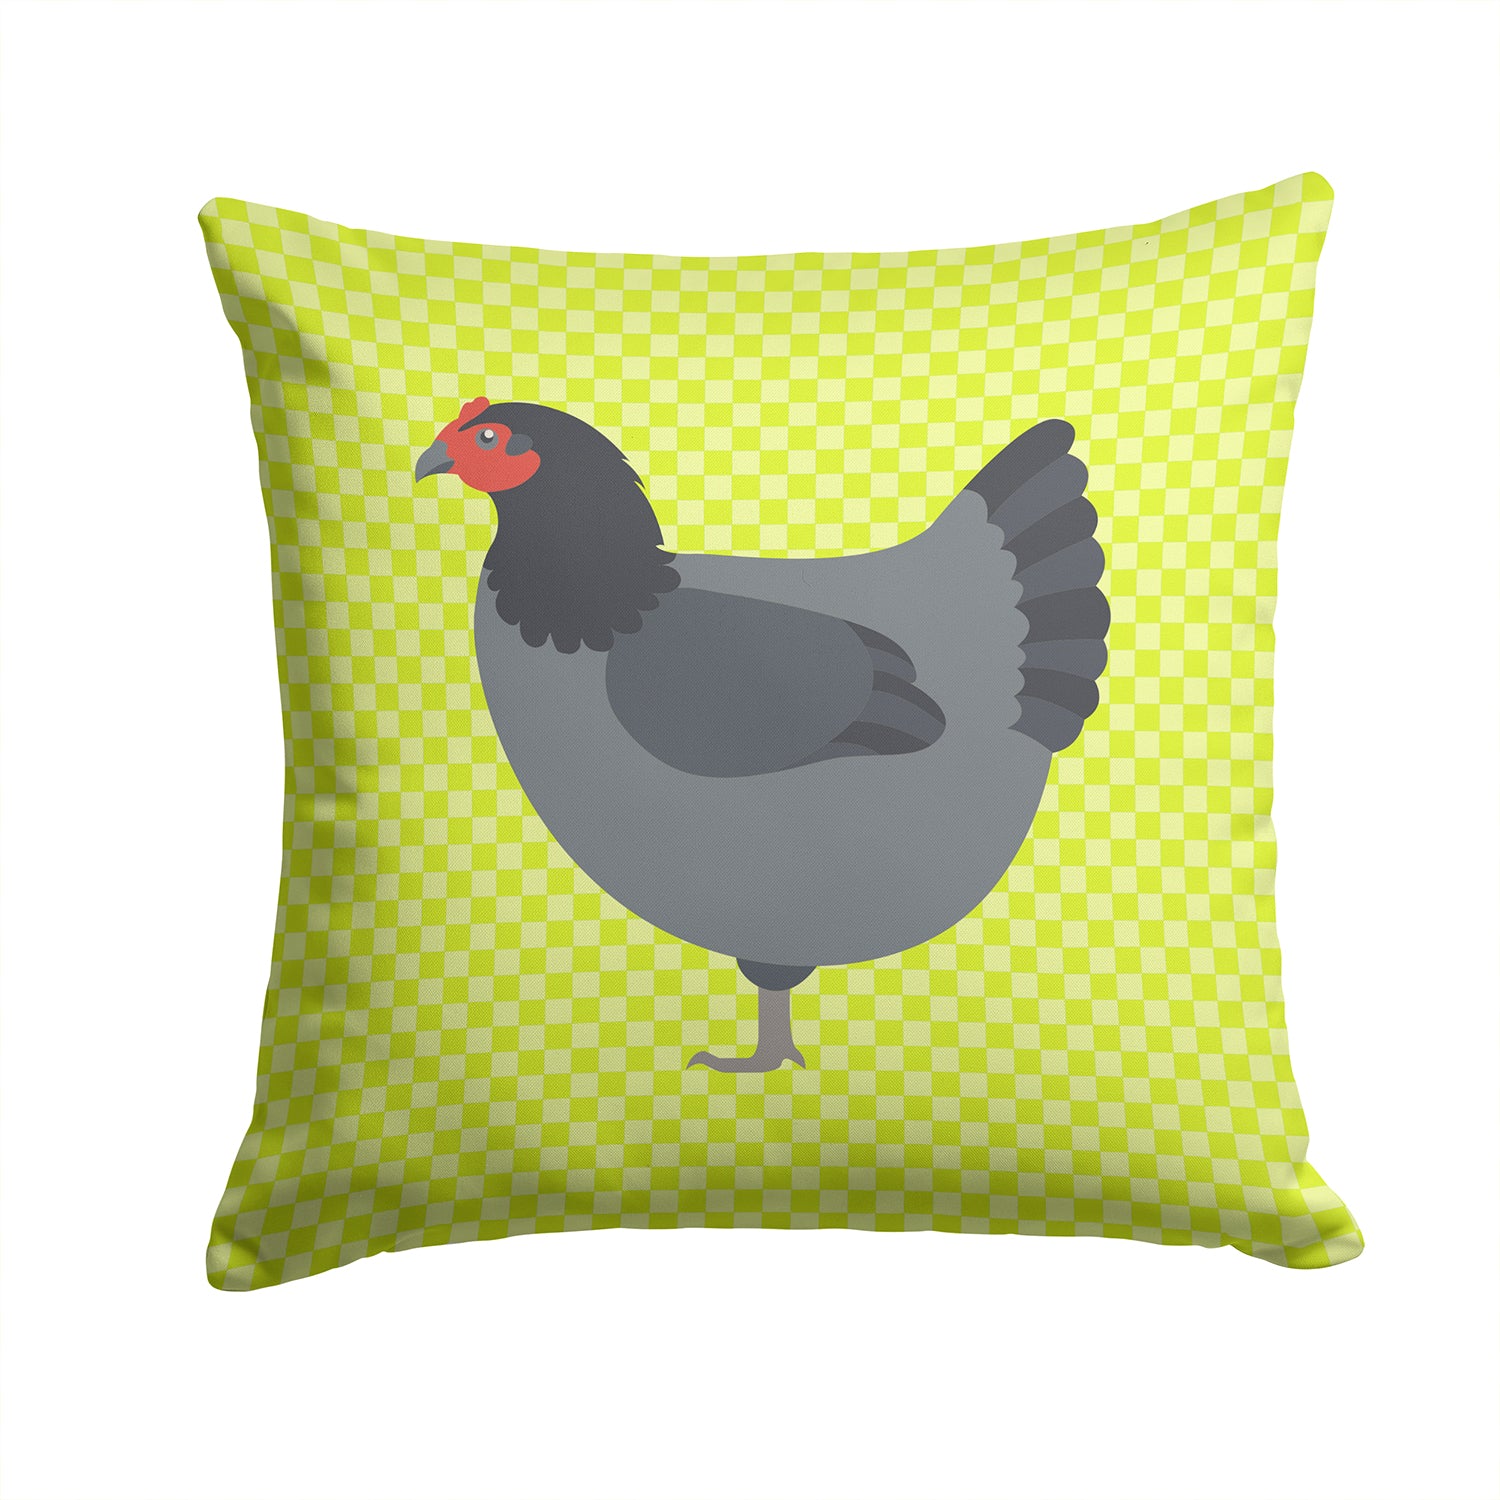 Jersey Giant Chicken Green Fabric Decorative Pillow BB7661PW1414 - the-store.com